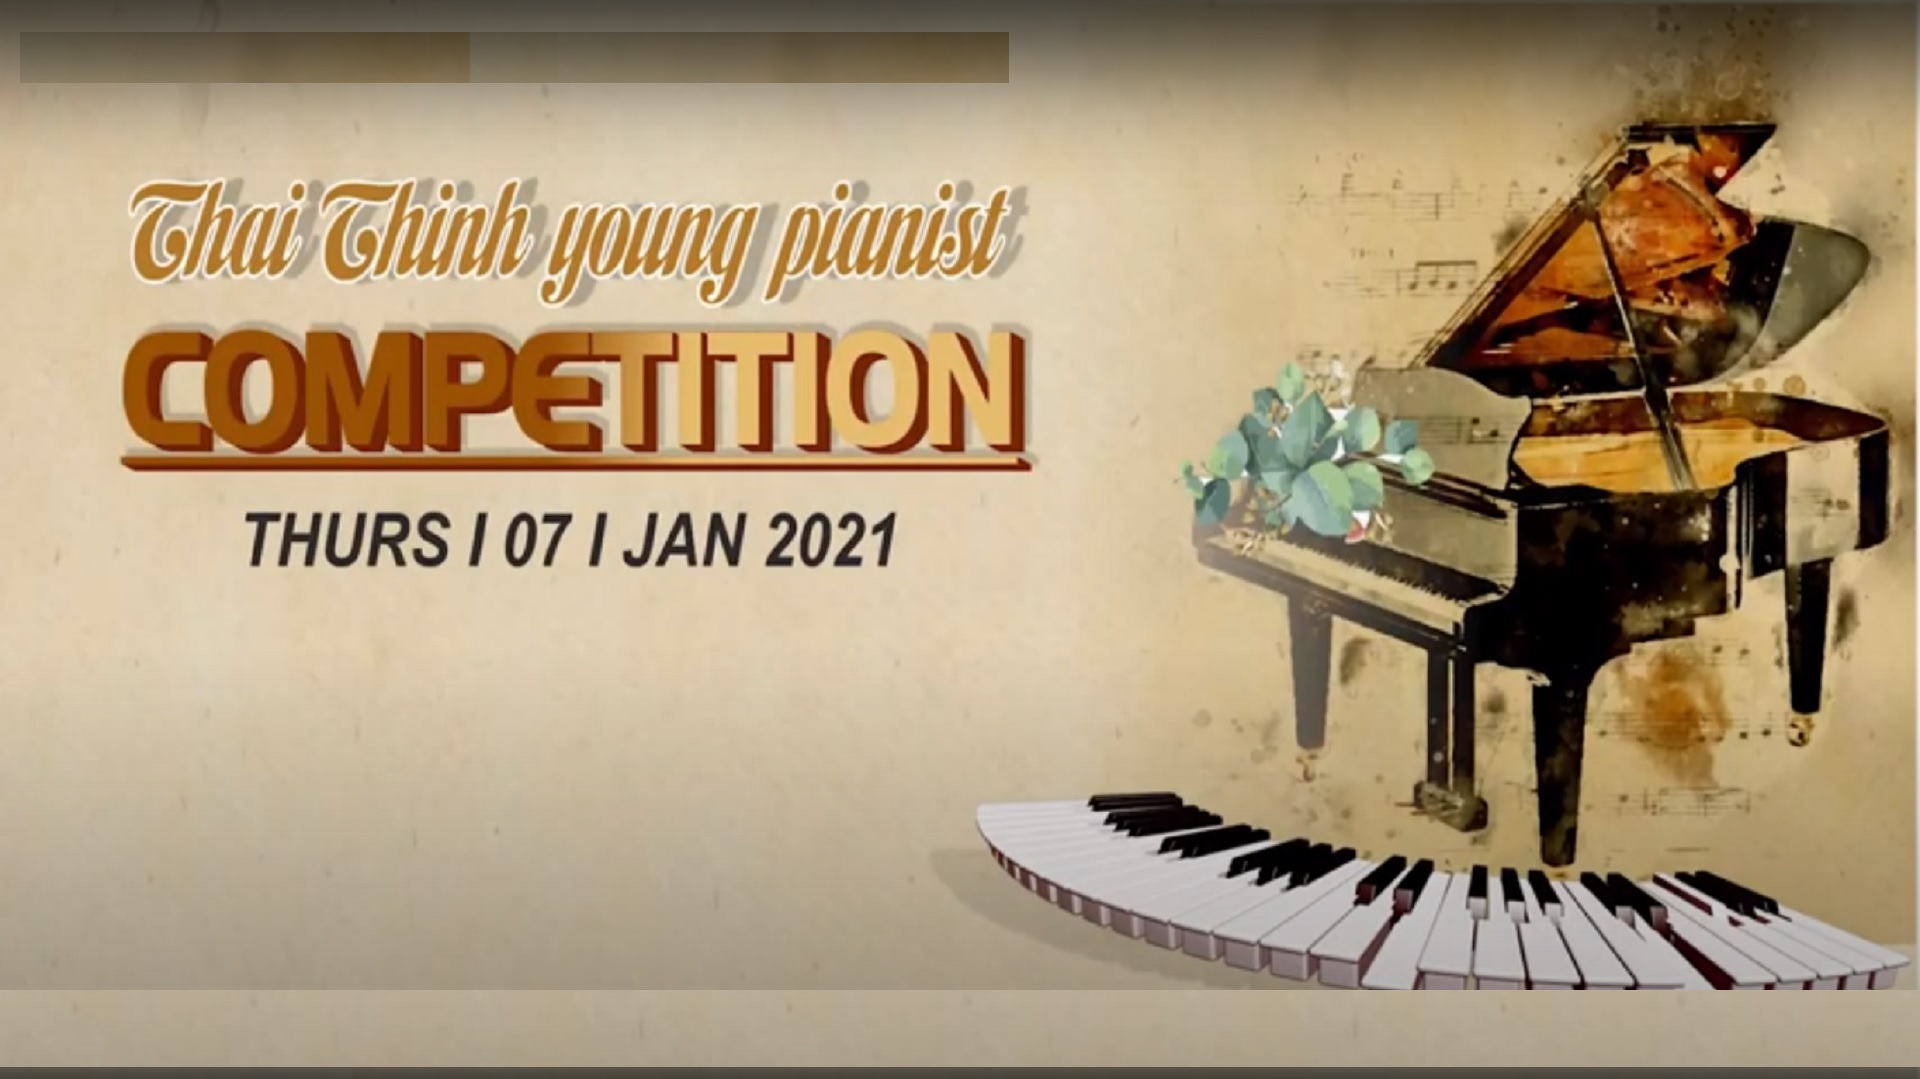 THAI THINH YOUNG PIANIST COMPETITION